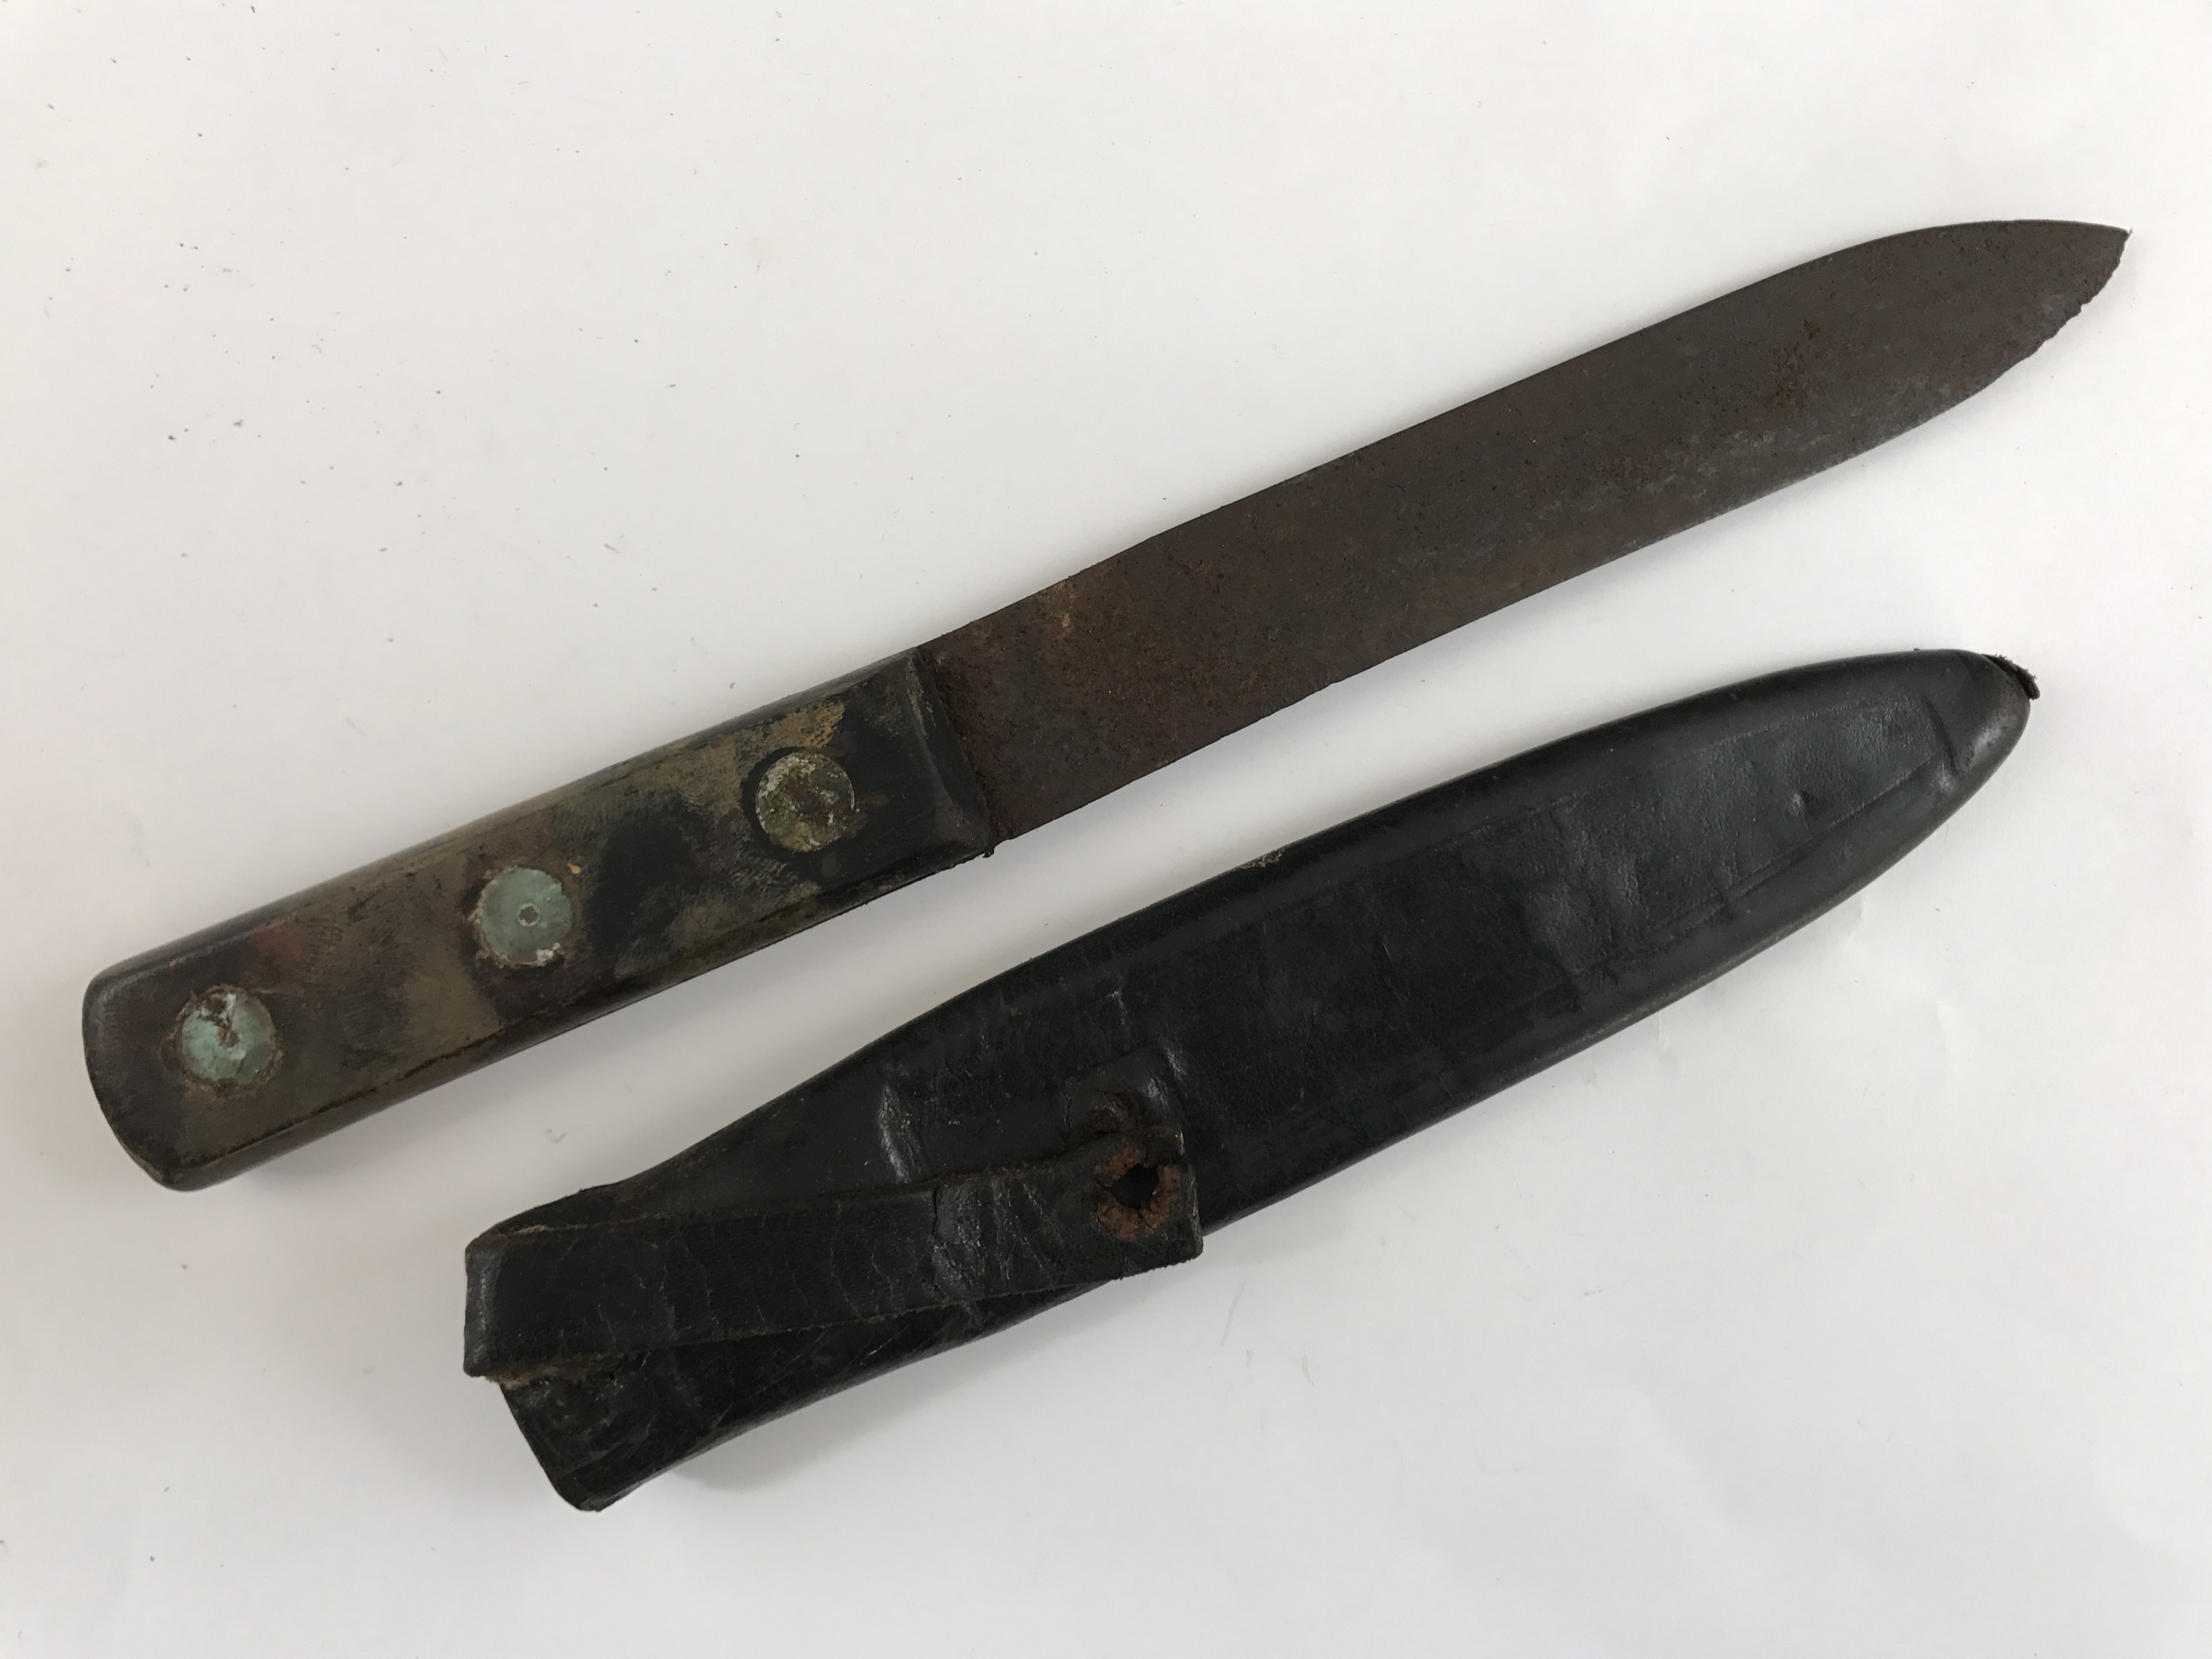 A Victorian Green River knife